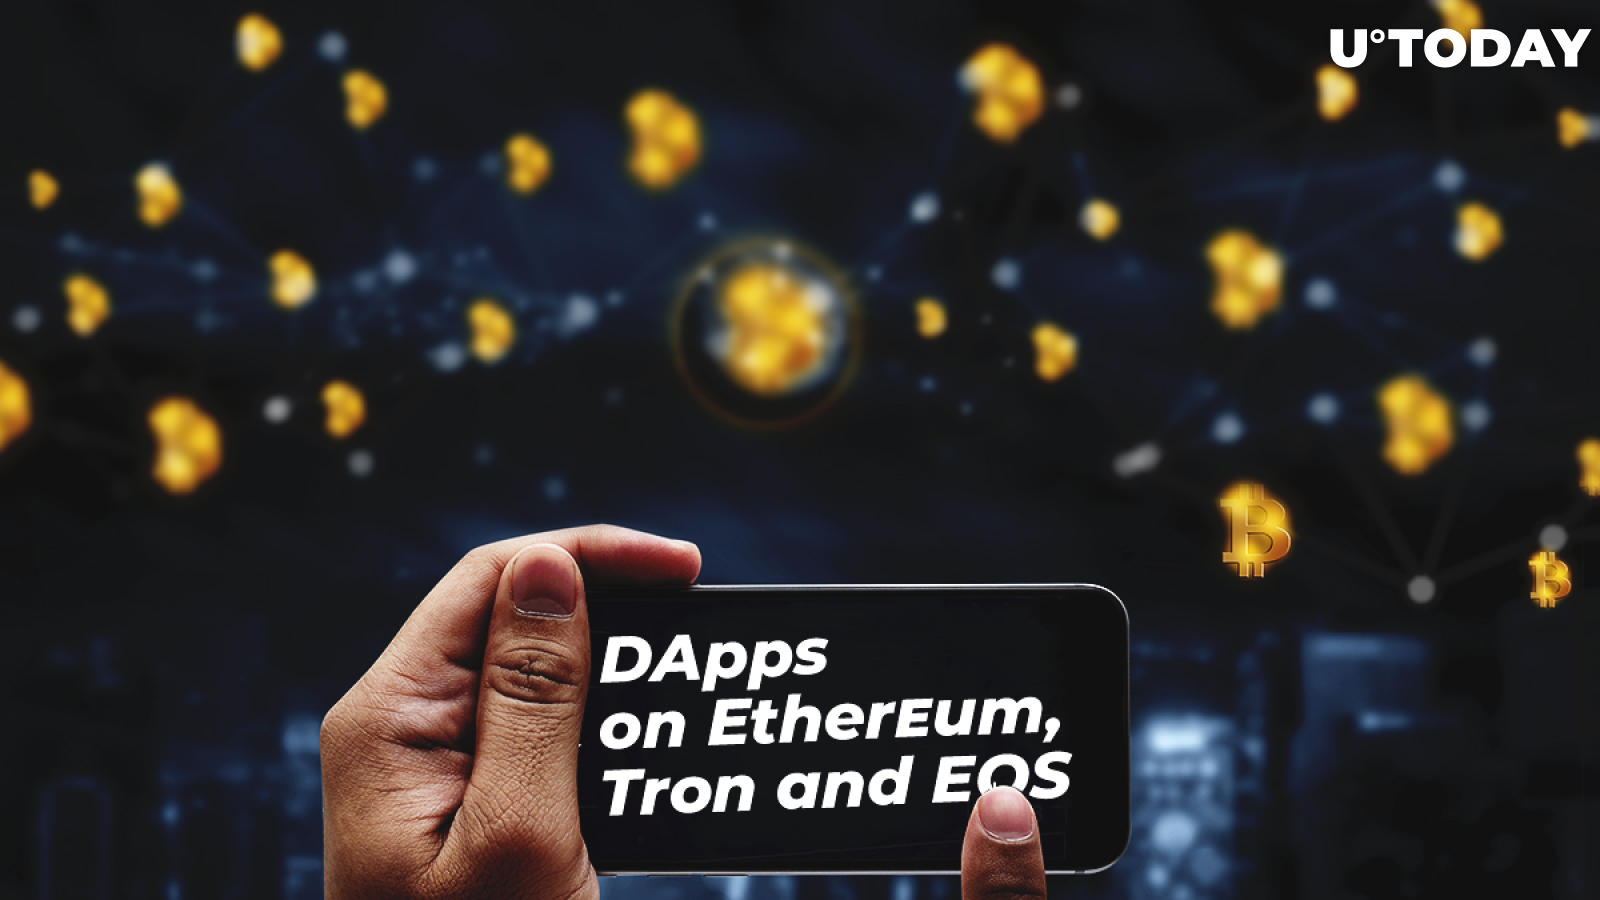 10 Popular DApps 2019 — DApps on Ethereum, Tron and EOS